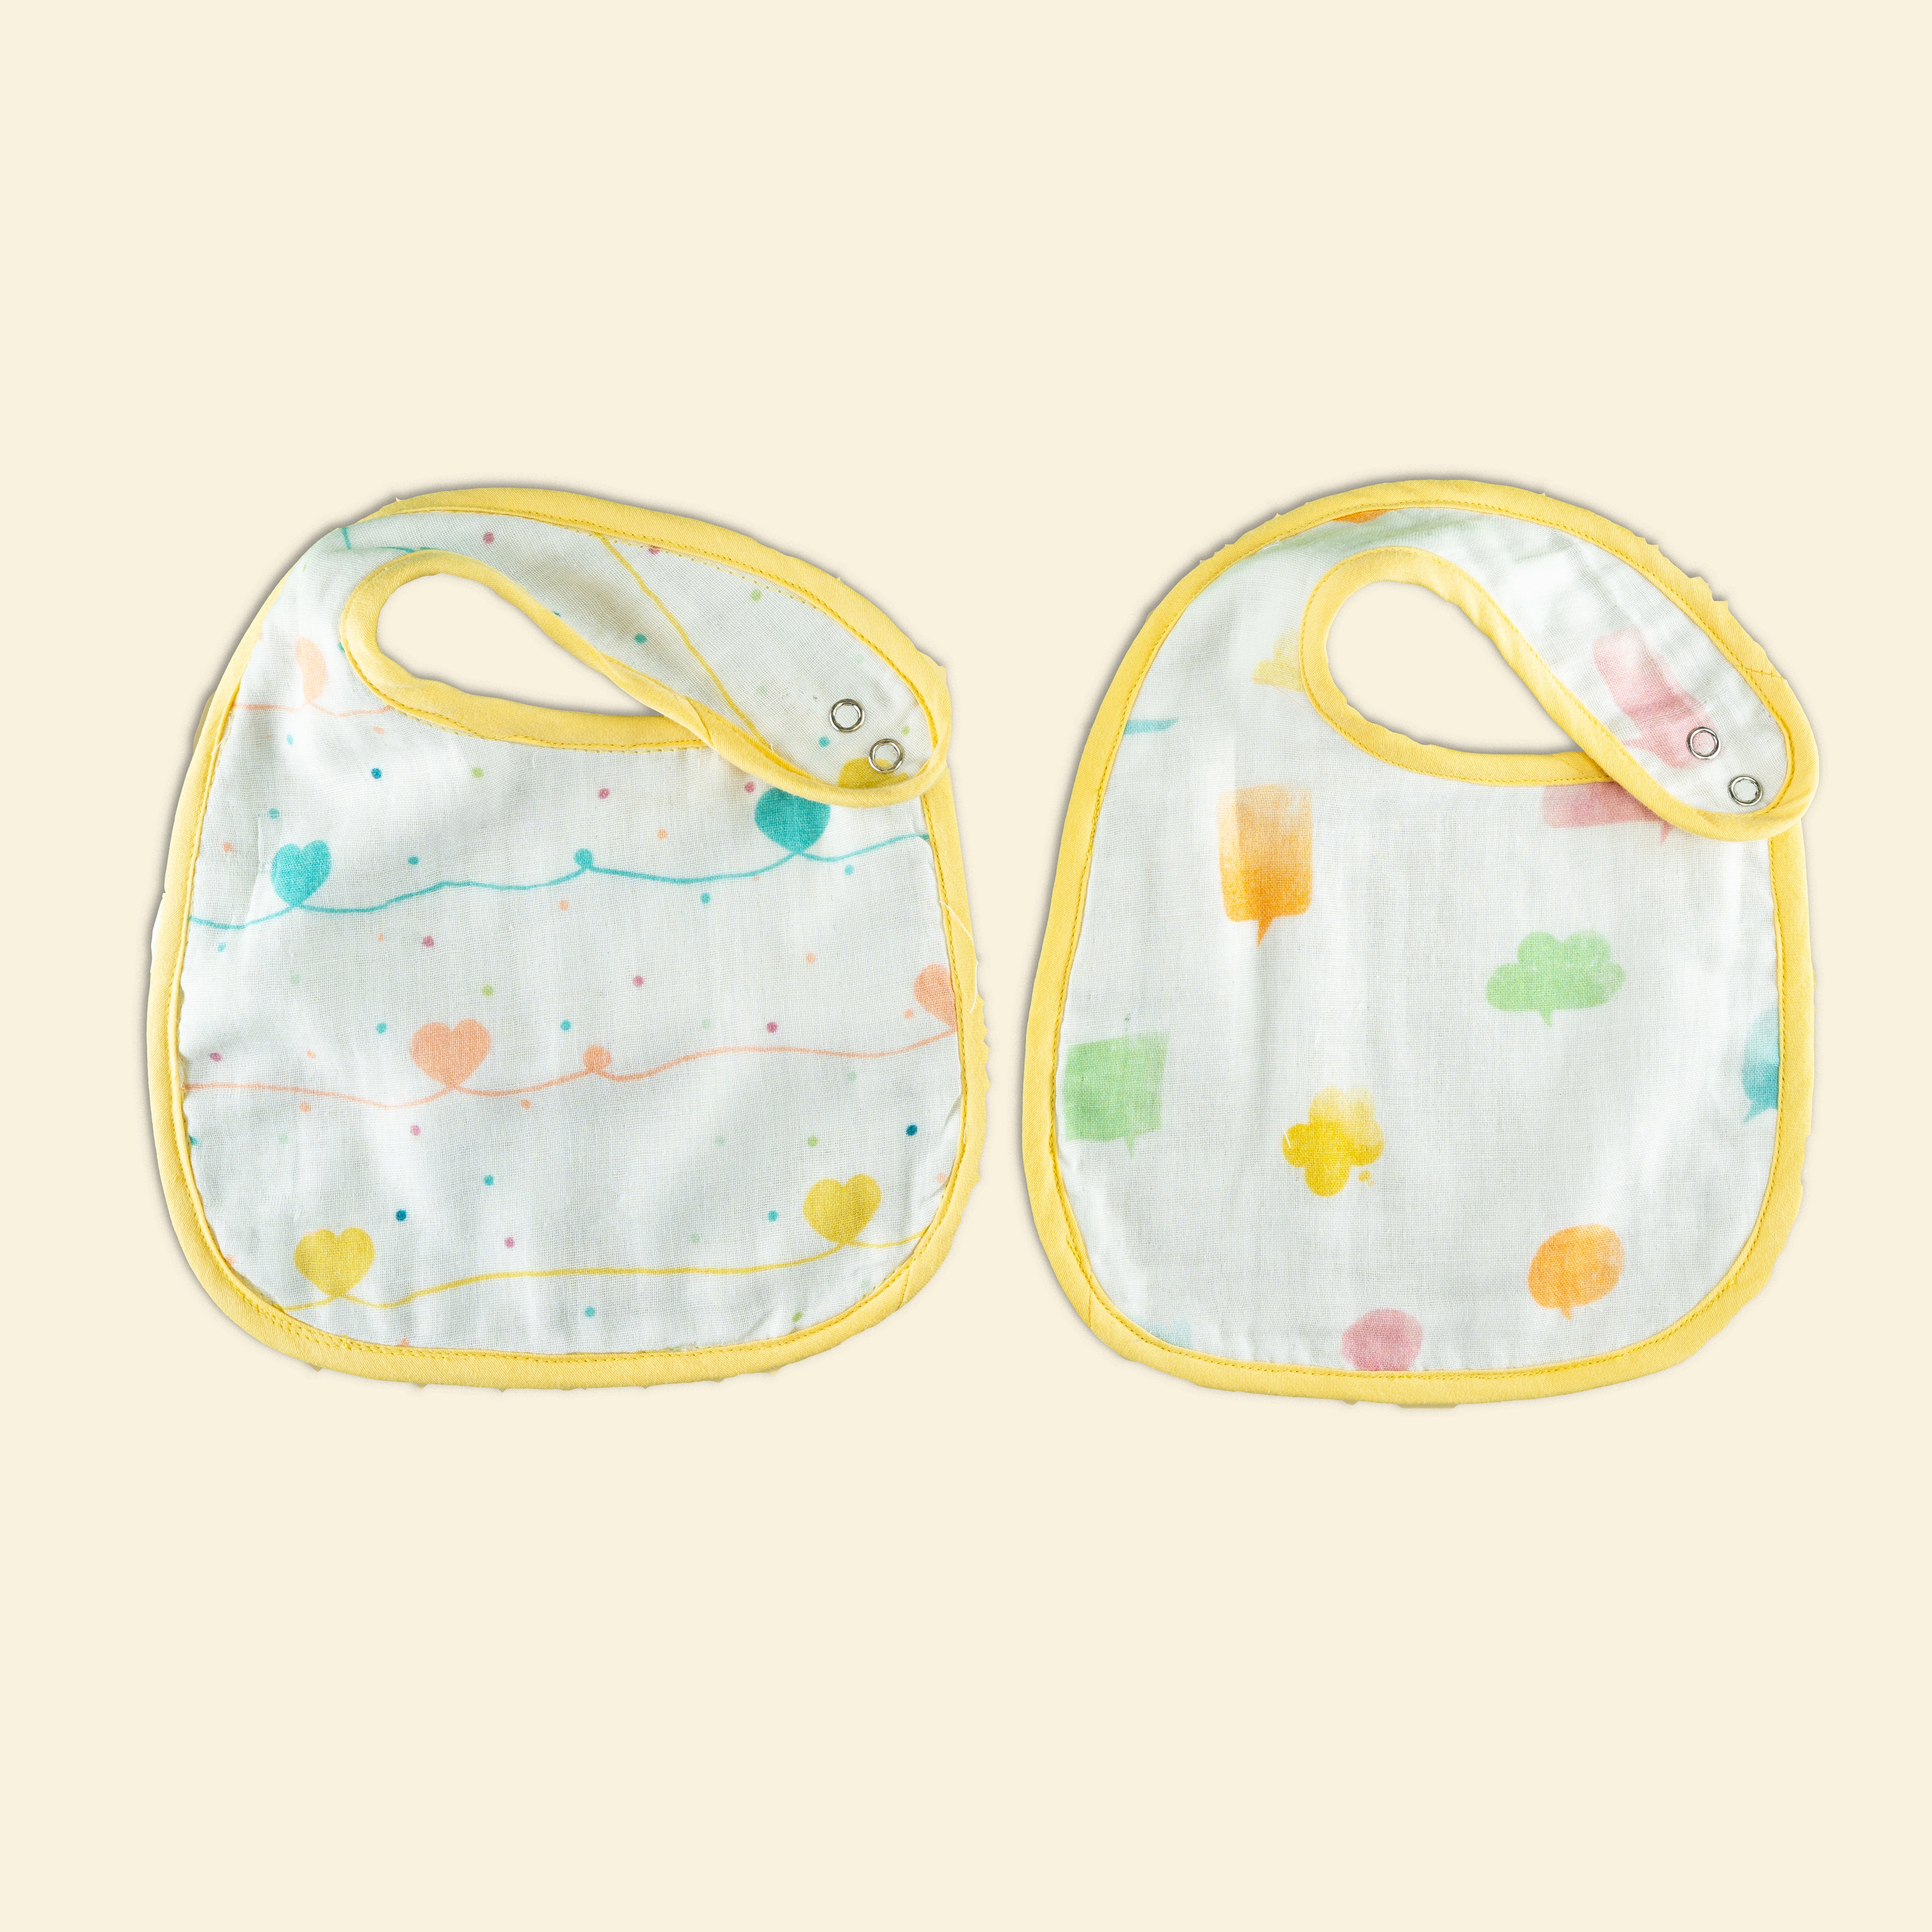 Tiny Snooze Organic Classic Bibs (Set of 2)- Lost In Thoughts